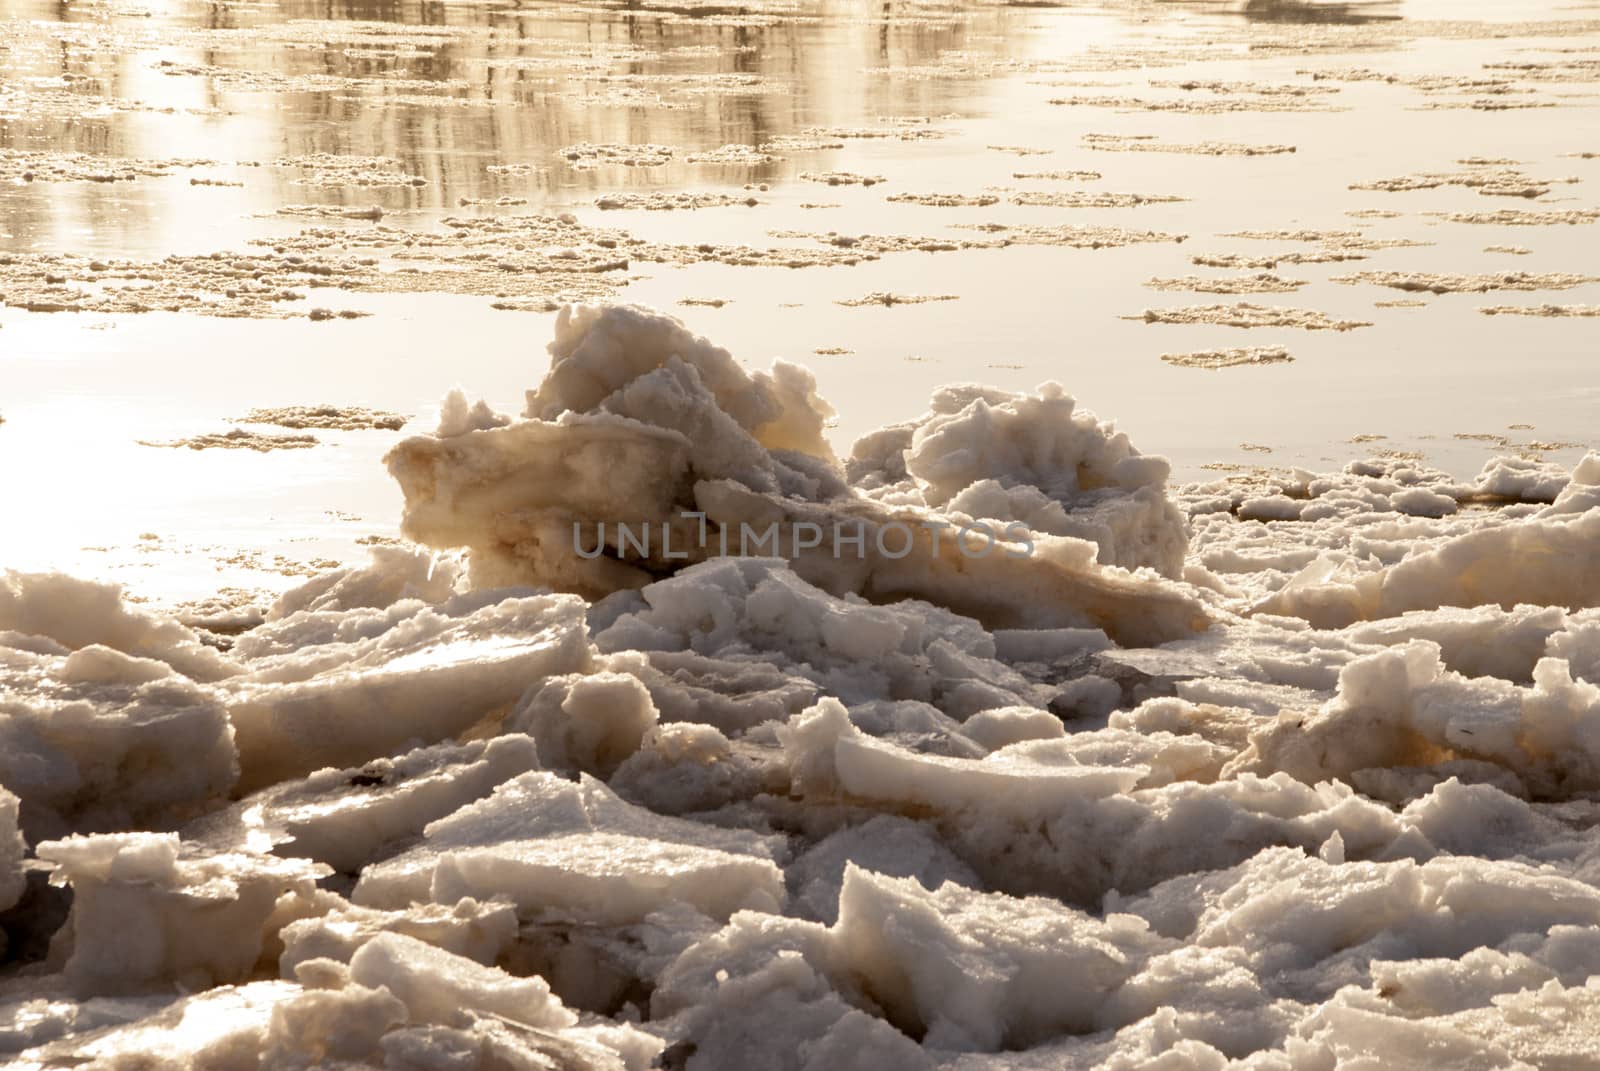 Drifting ice floes in the Elbe